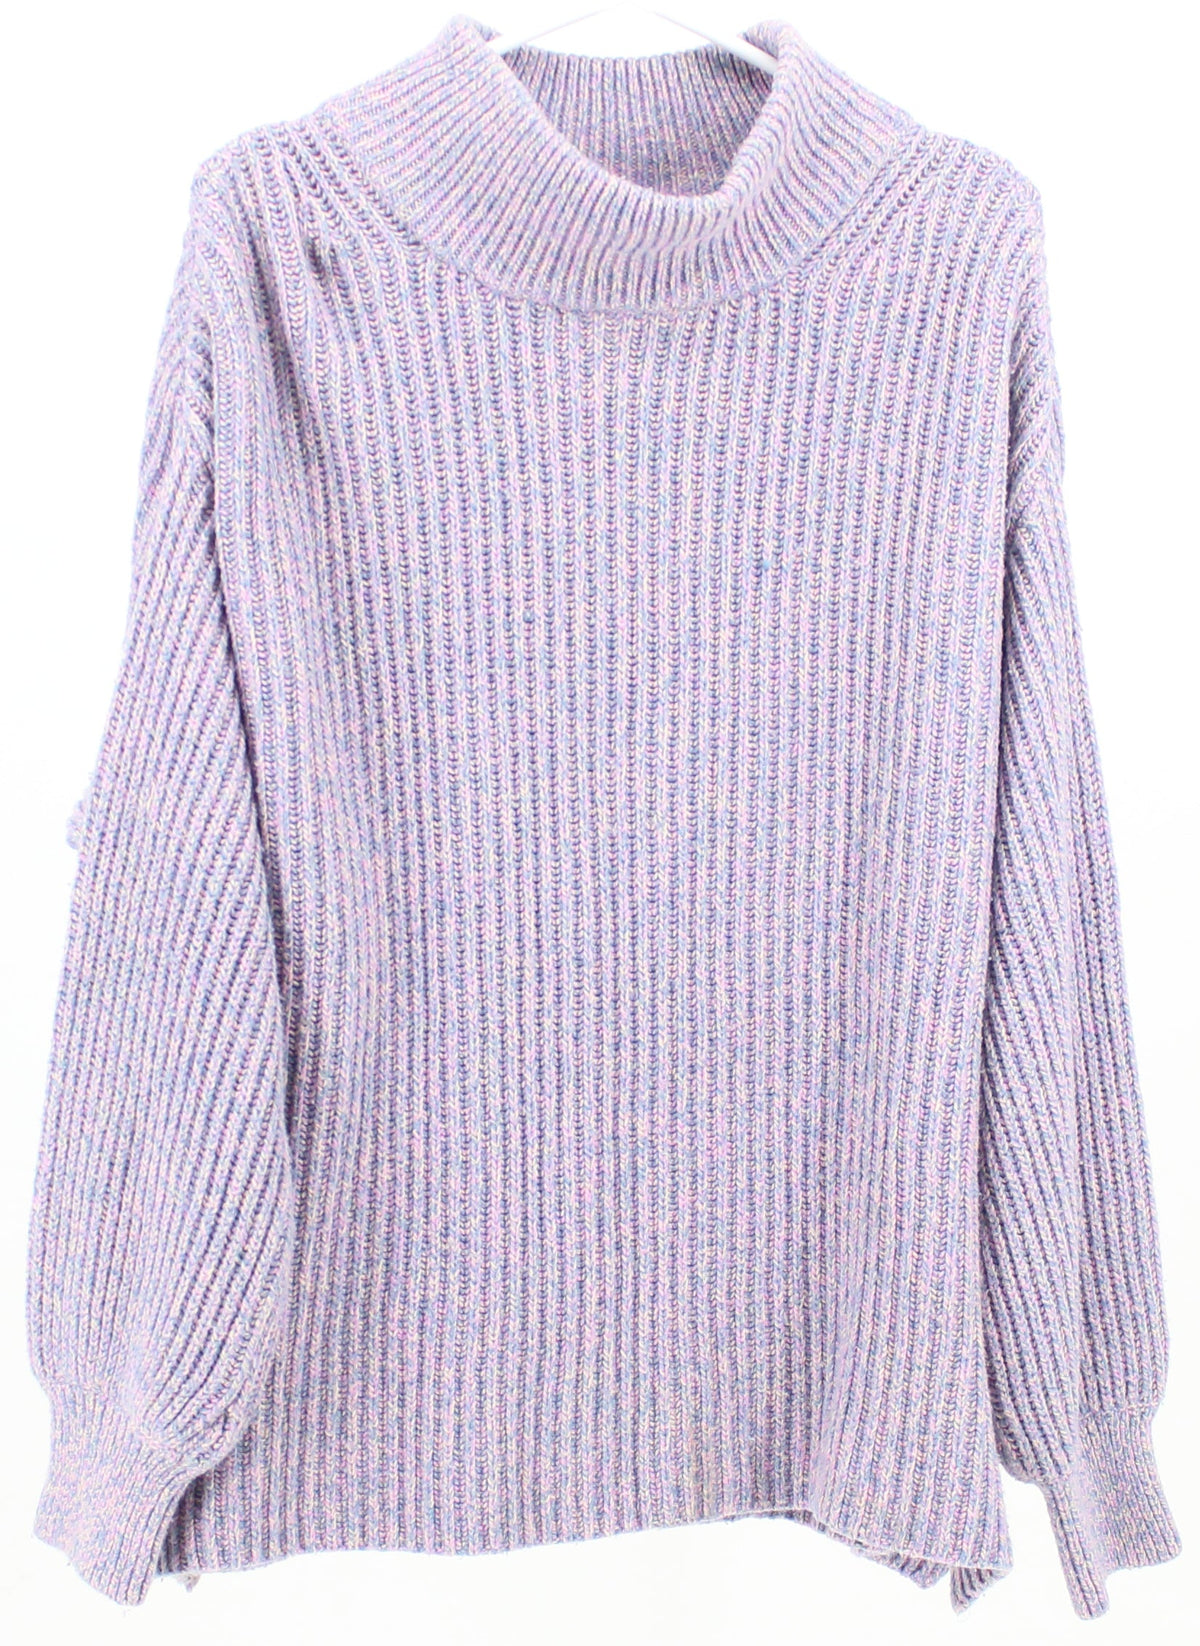 H&M Purple Beige and Blue Color Blend Sweater